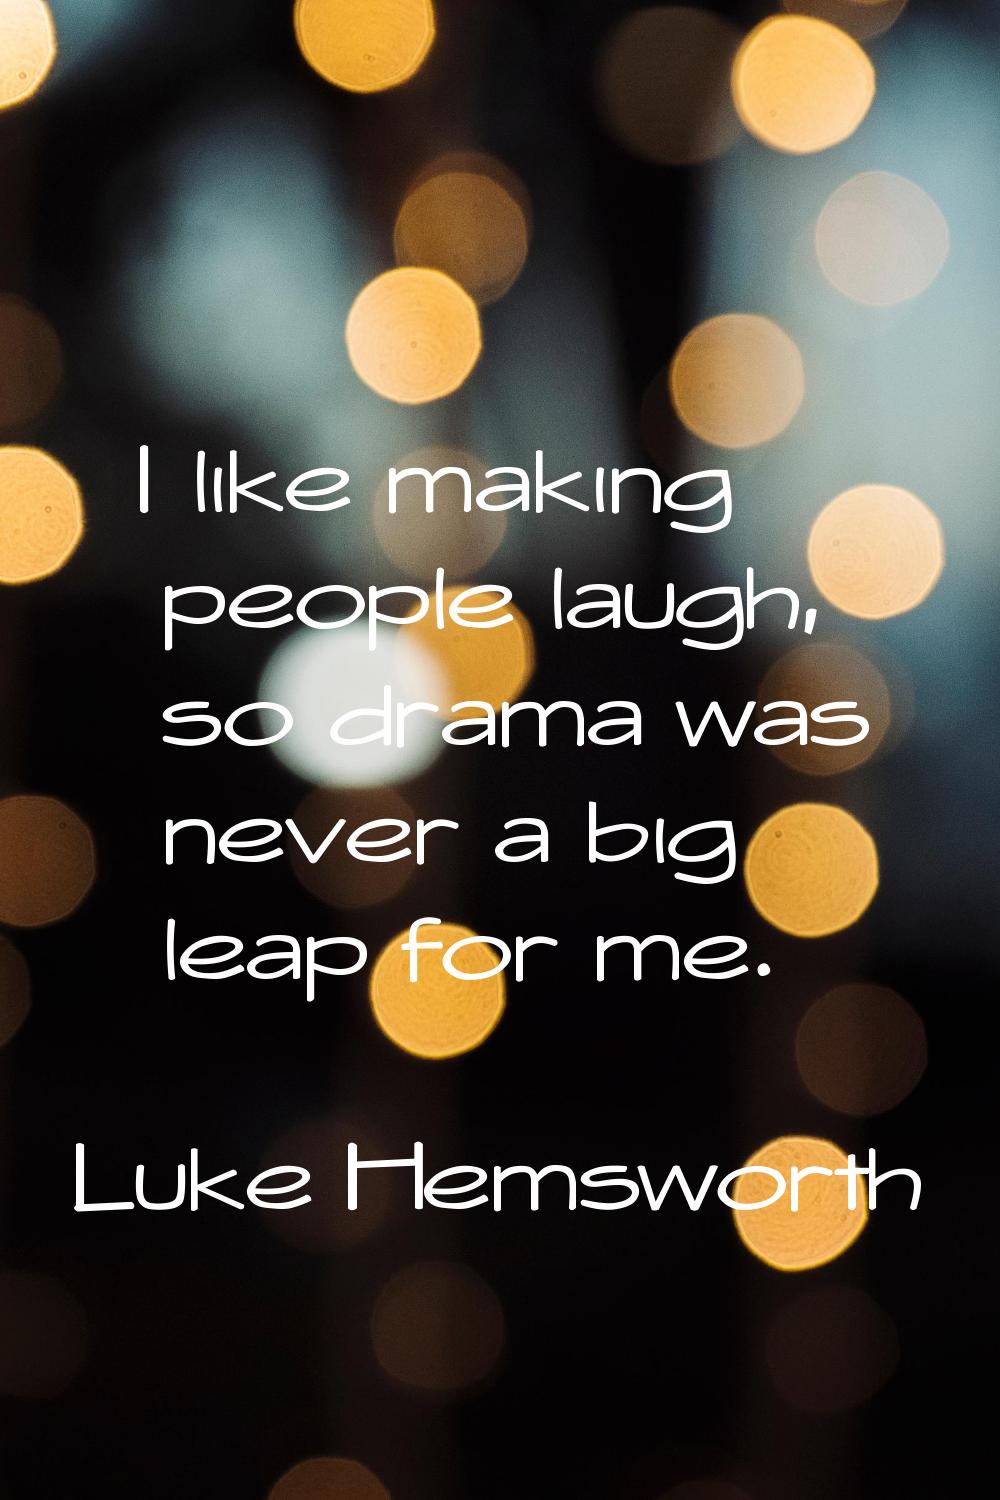 I like making people laugh, so drama was never a big leap for me.